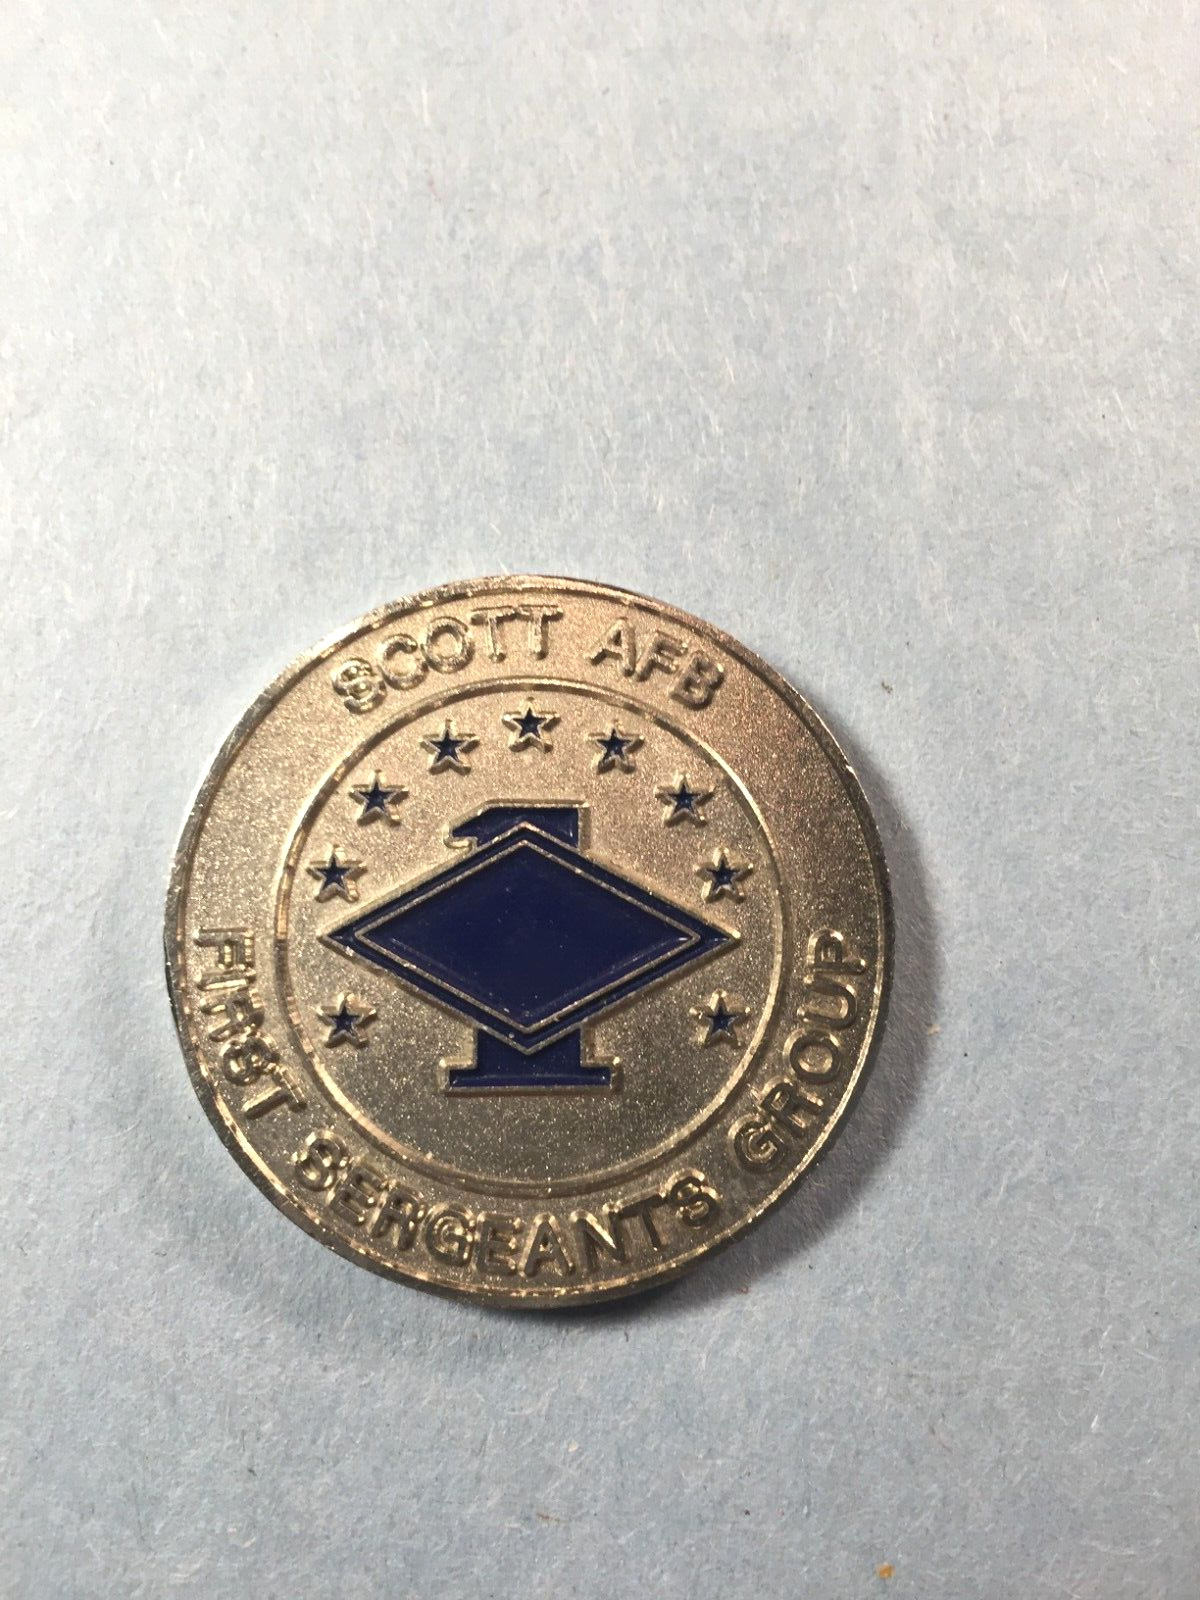 U S Air Force Challenge coin-First Sergeants Group Scott AFB